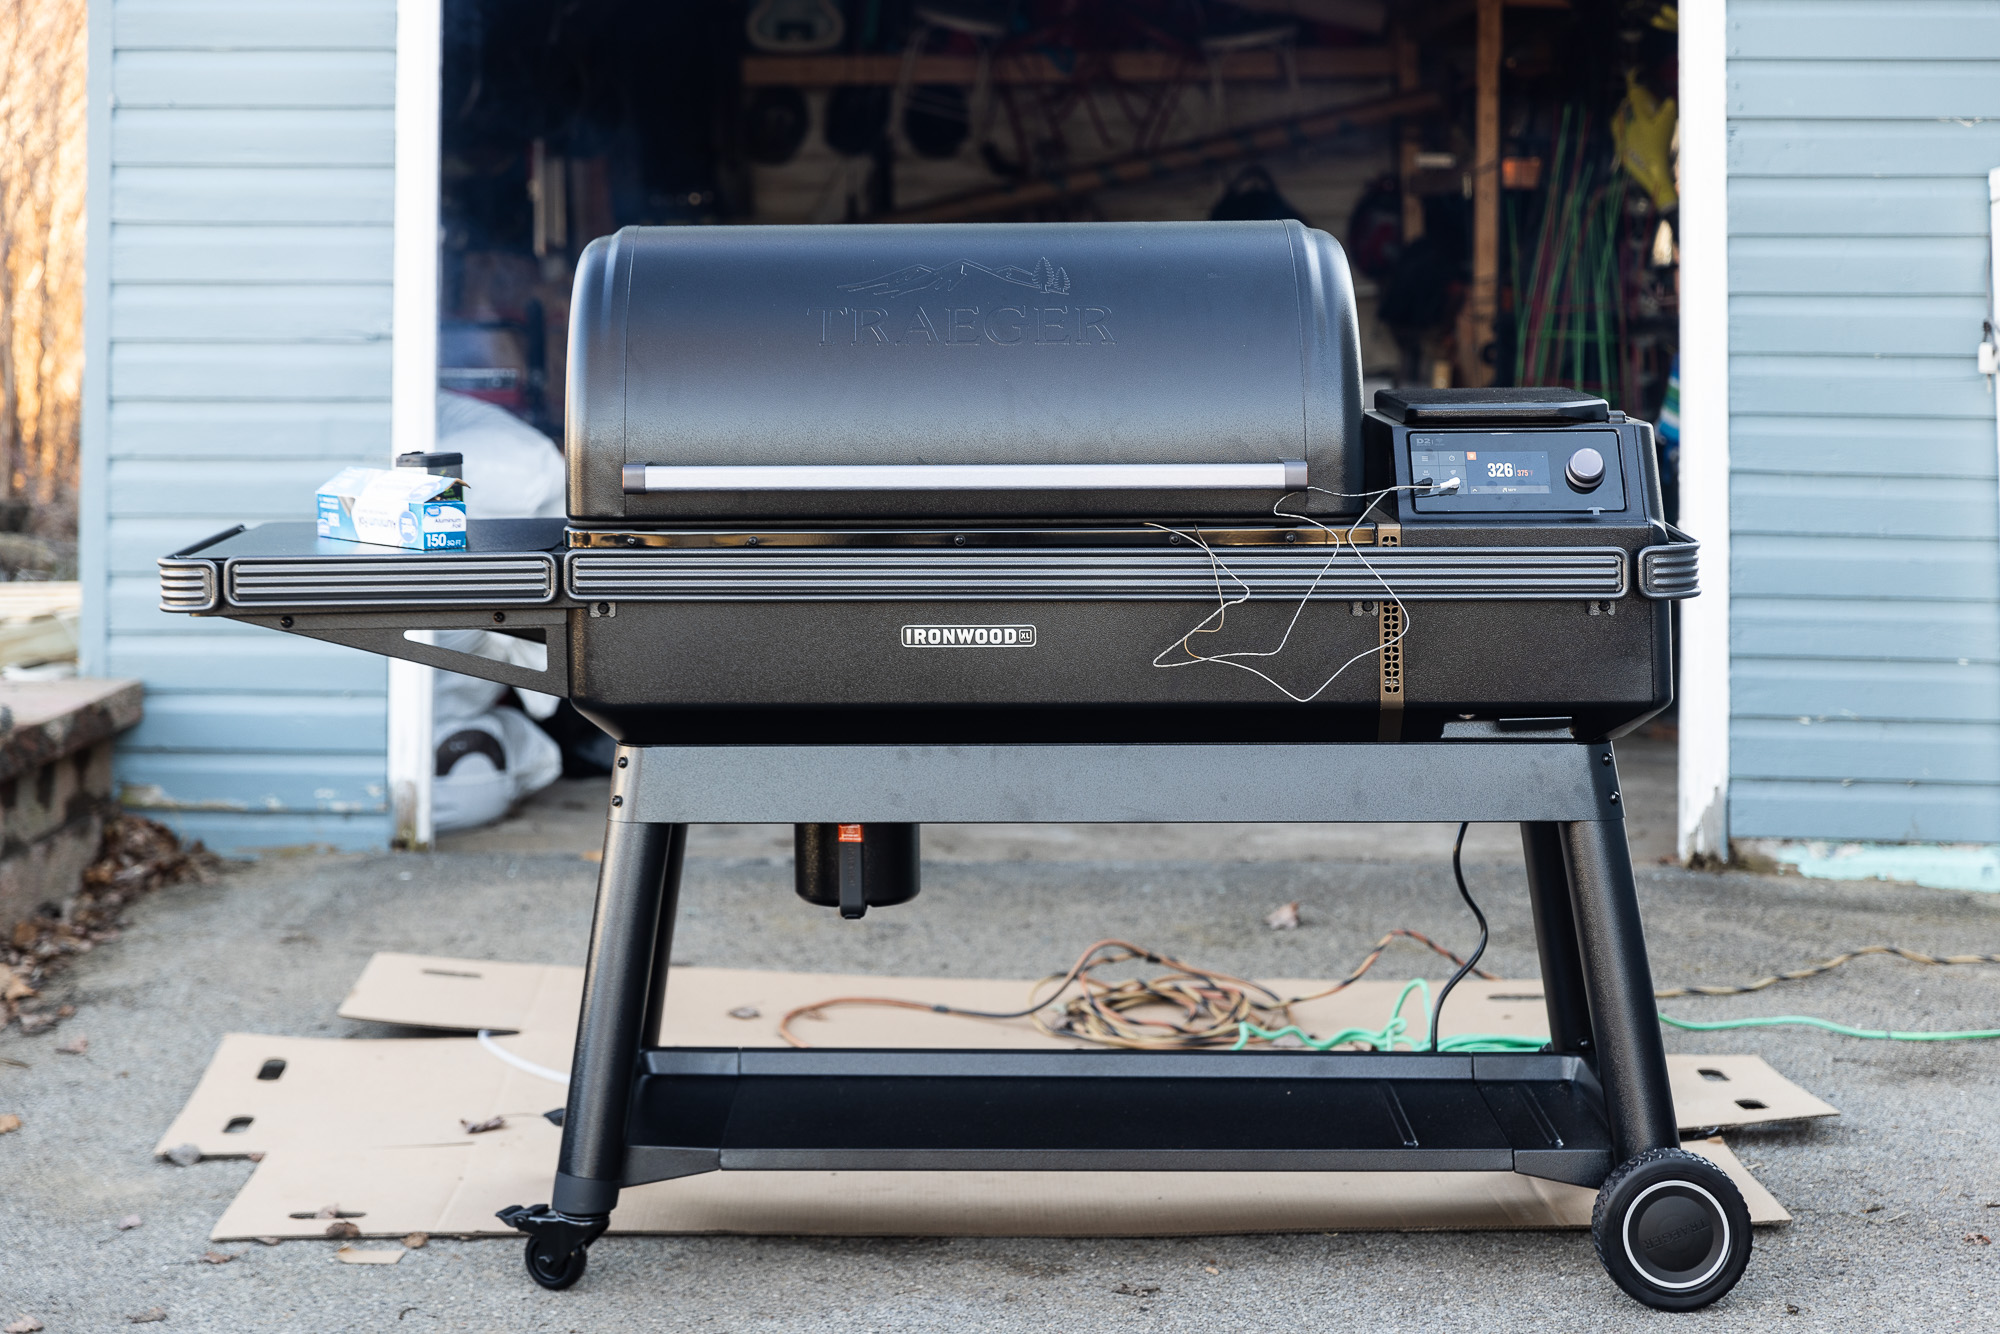 Traeger Ironwood (XL) Pellet Grill review